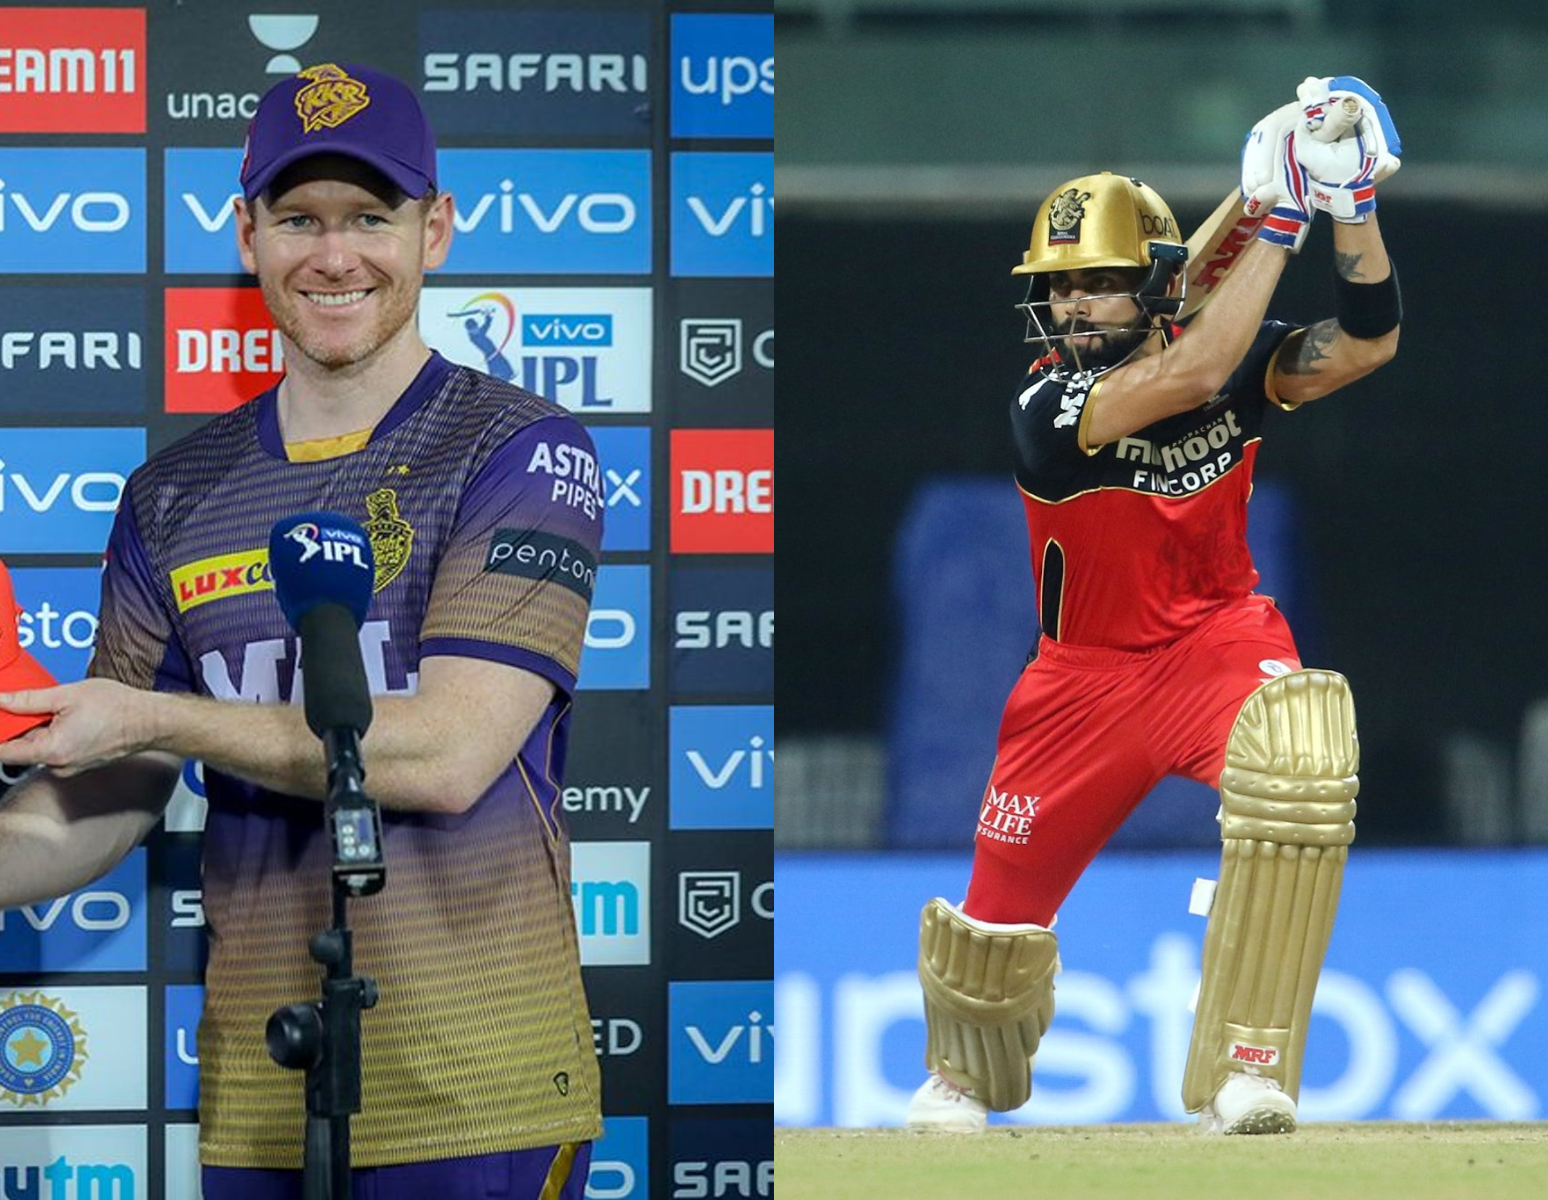 RCB are undefeated thus far, while KKR have won one game in IPL 2021 | BCCI/IPL